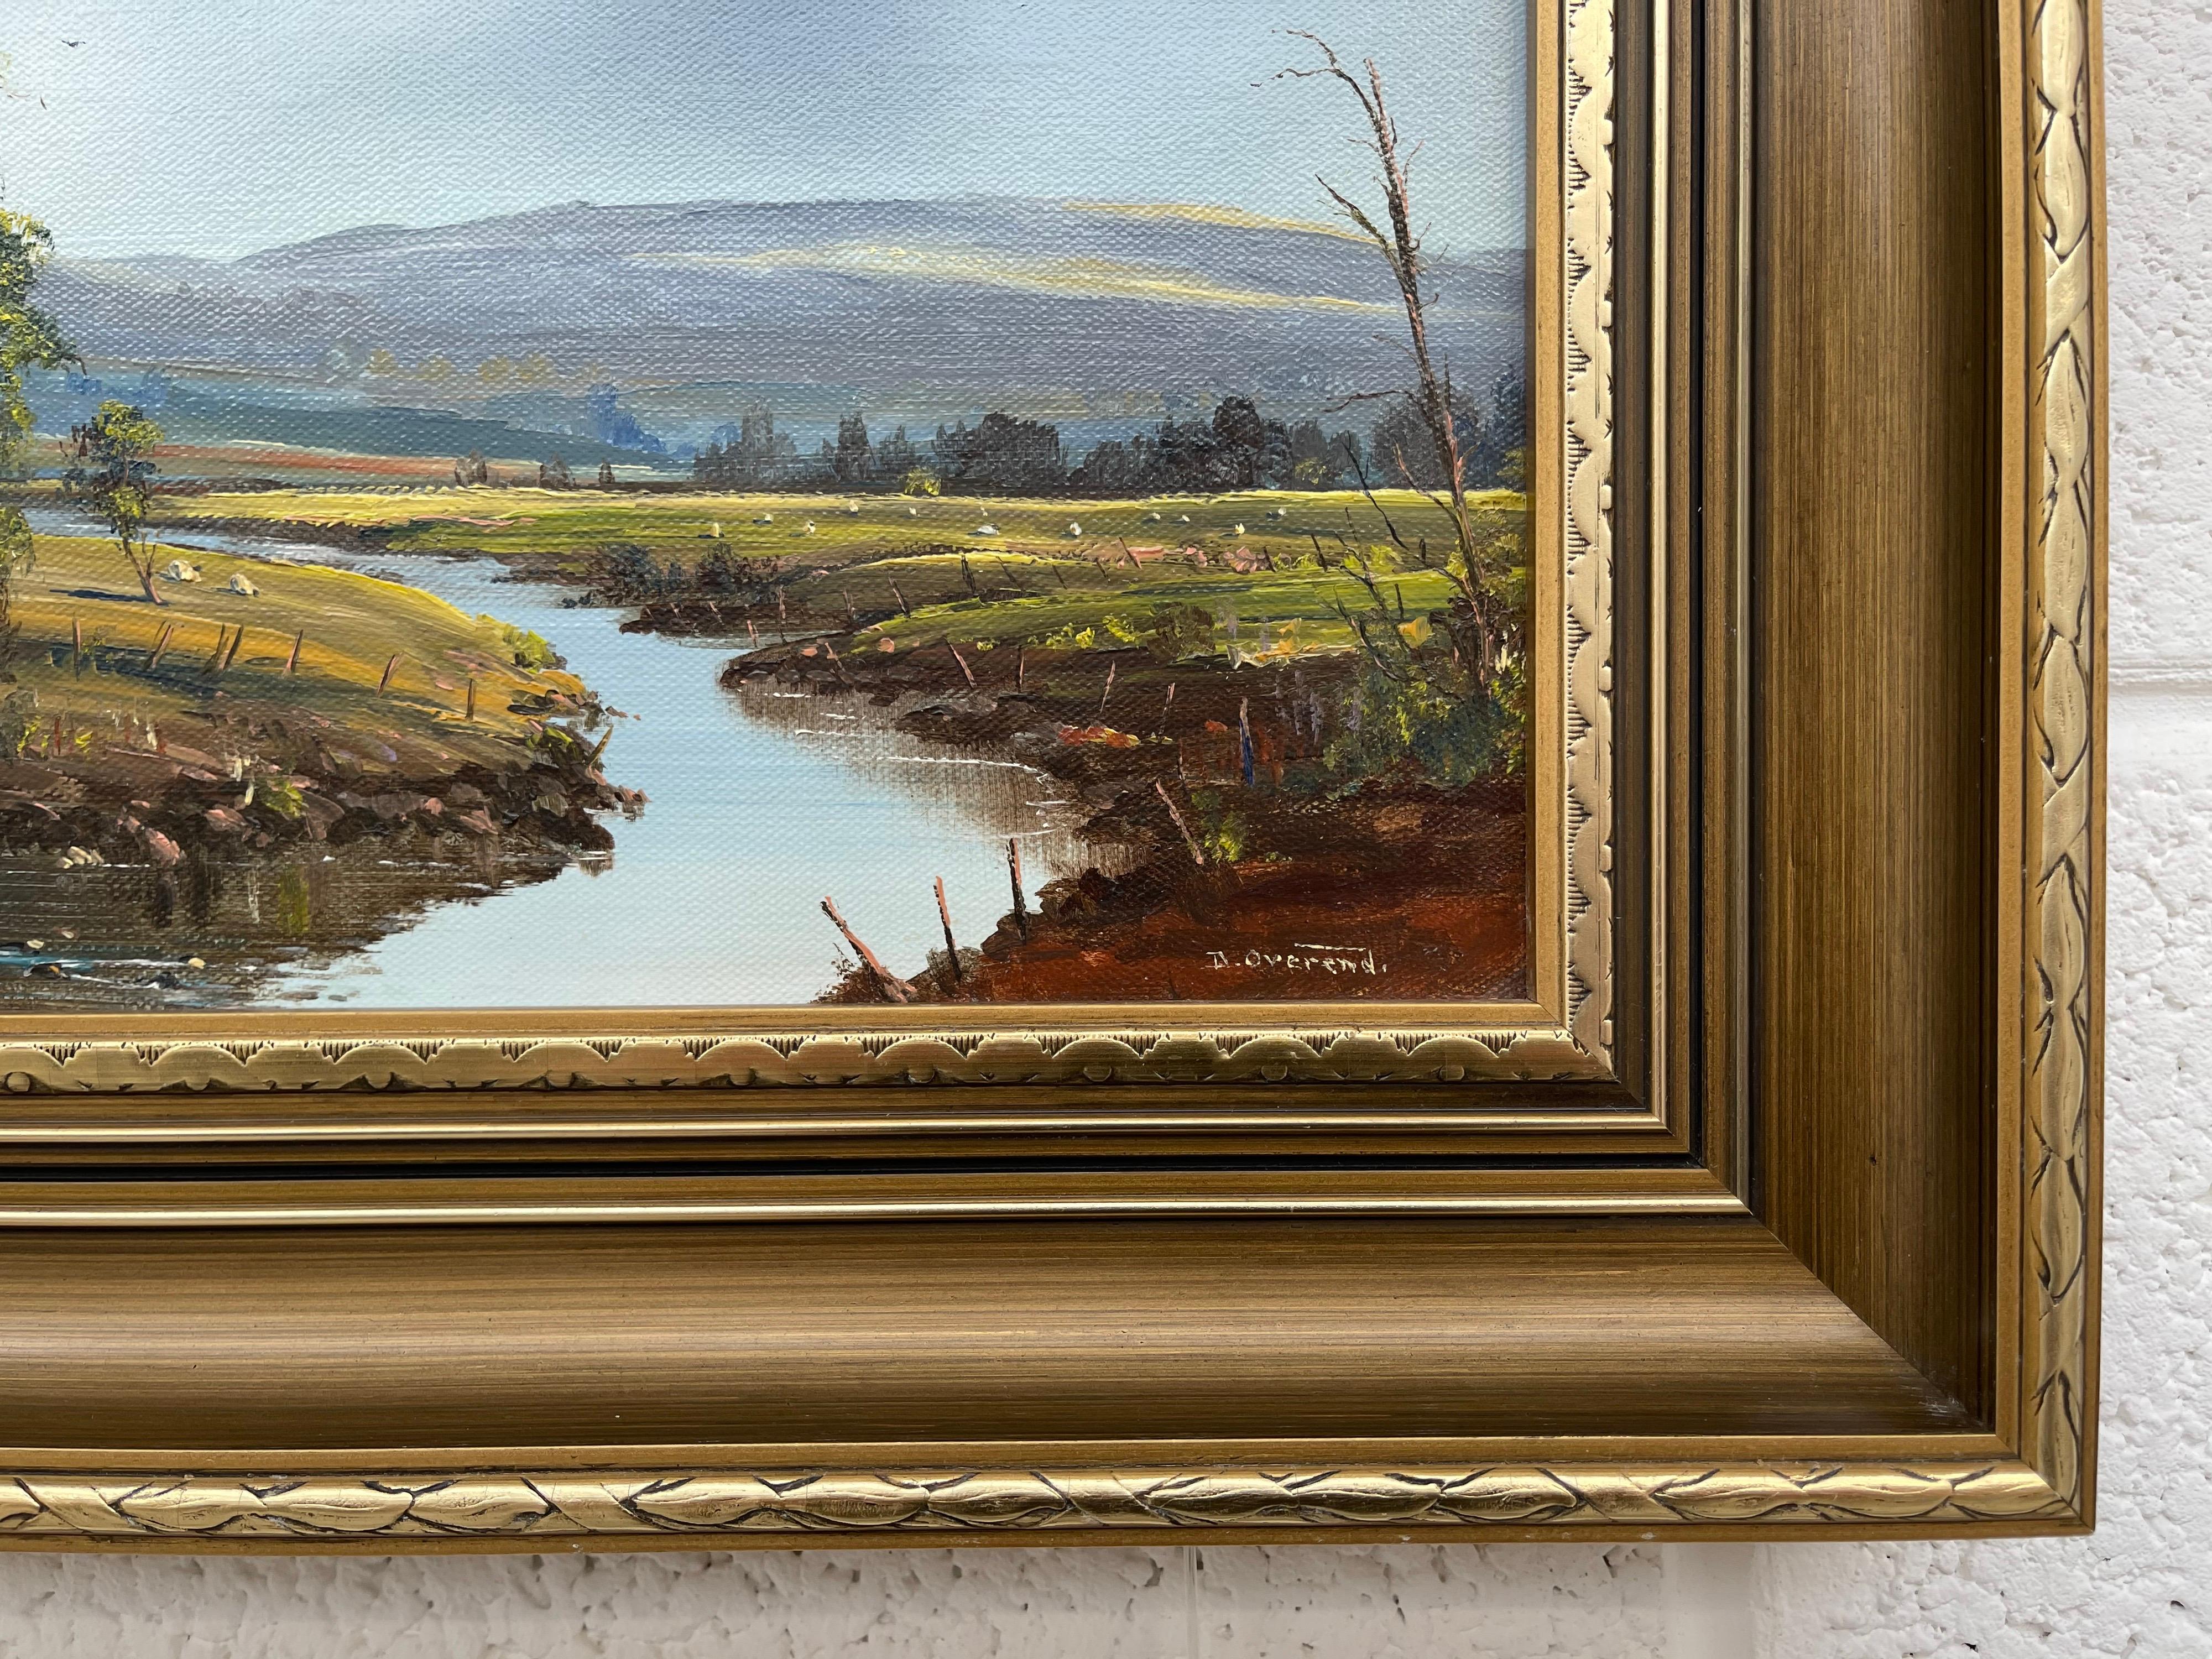 Northern Ireland River Landscape Oil Painting by Post War Modern Irish Artist David Overend.

Art measures 14 x 10 inches 
Frame measures 19 x 15 inches 

David Anthony Overend was born in 1932 and is self-taught landscape painter following the